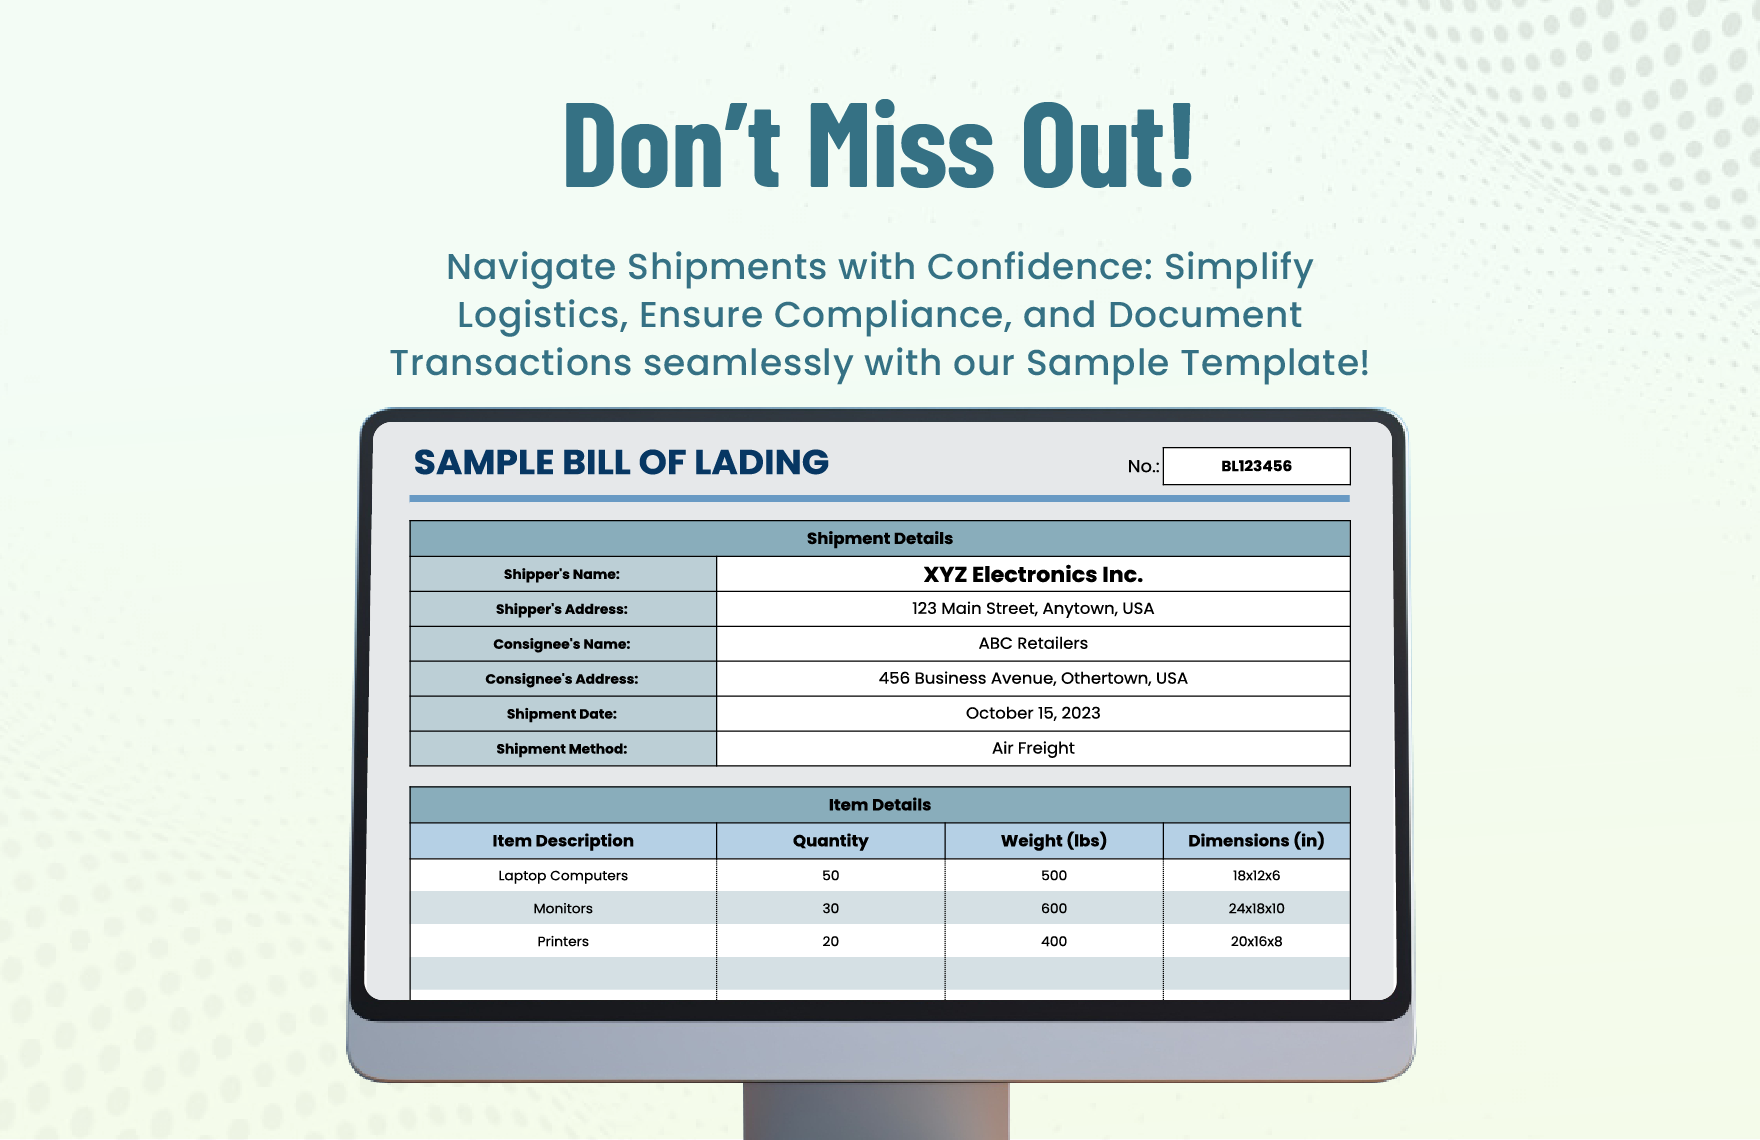 Sample Bill of Lading Template